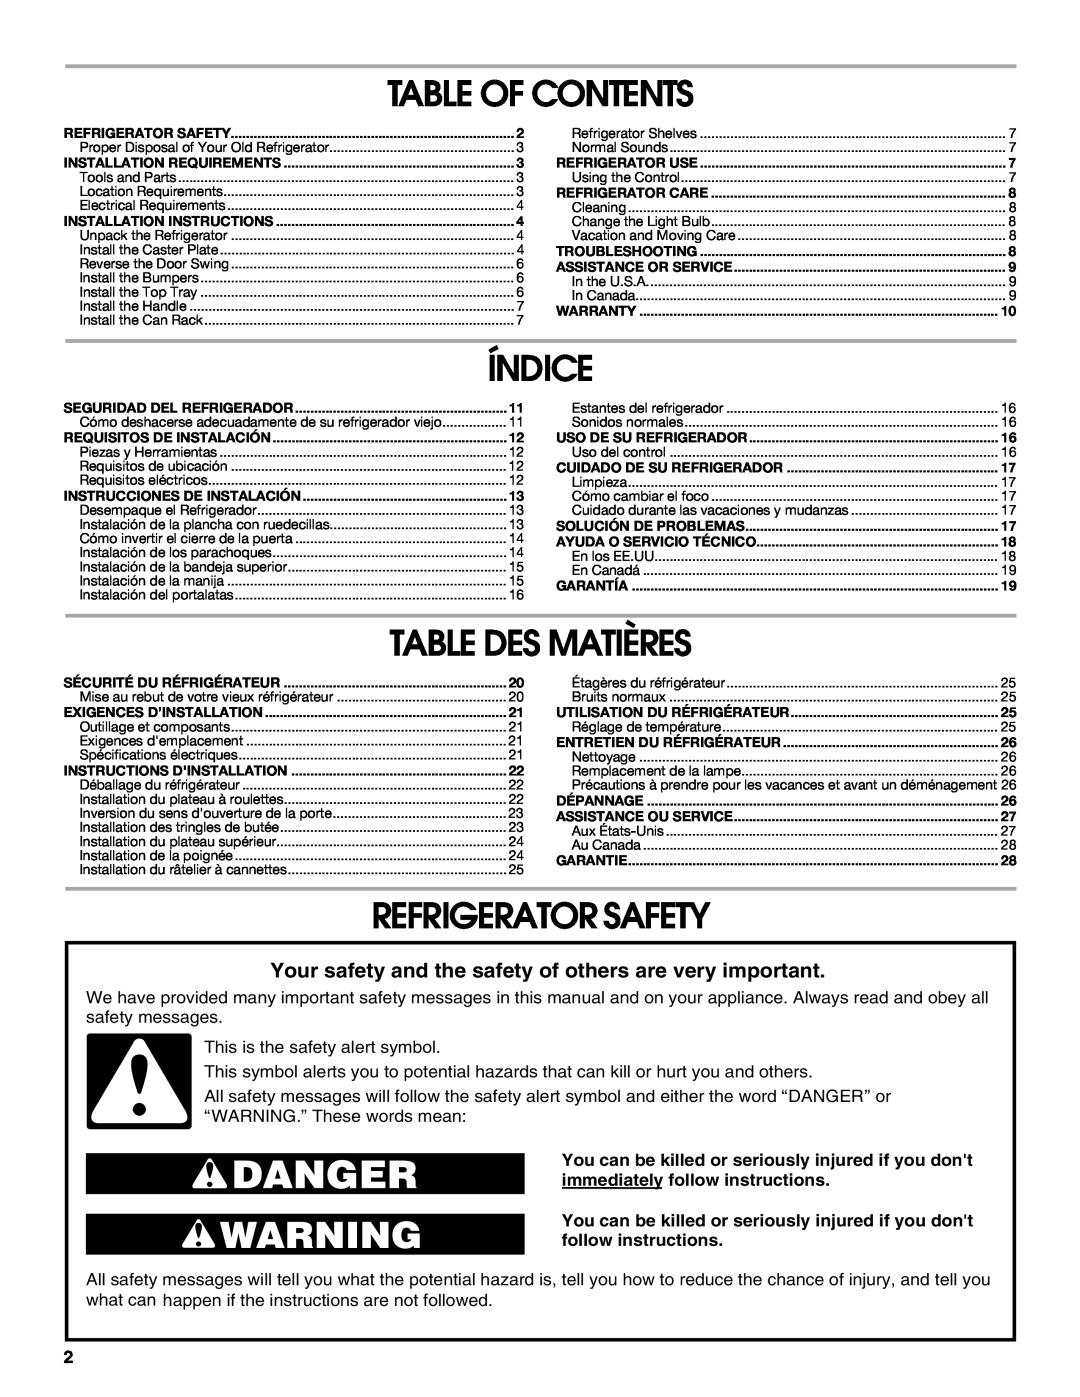 Whirlpool GARF06XXMG00 manual Table Of Contents, Índice, Table Des Matières, Refrigerator Safety 